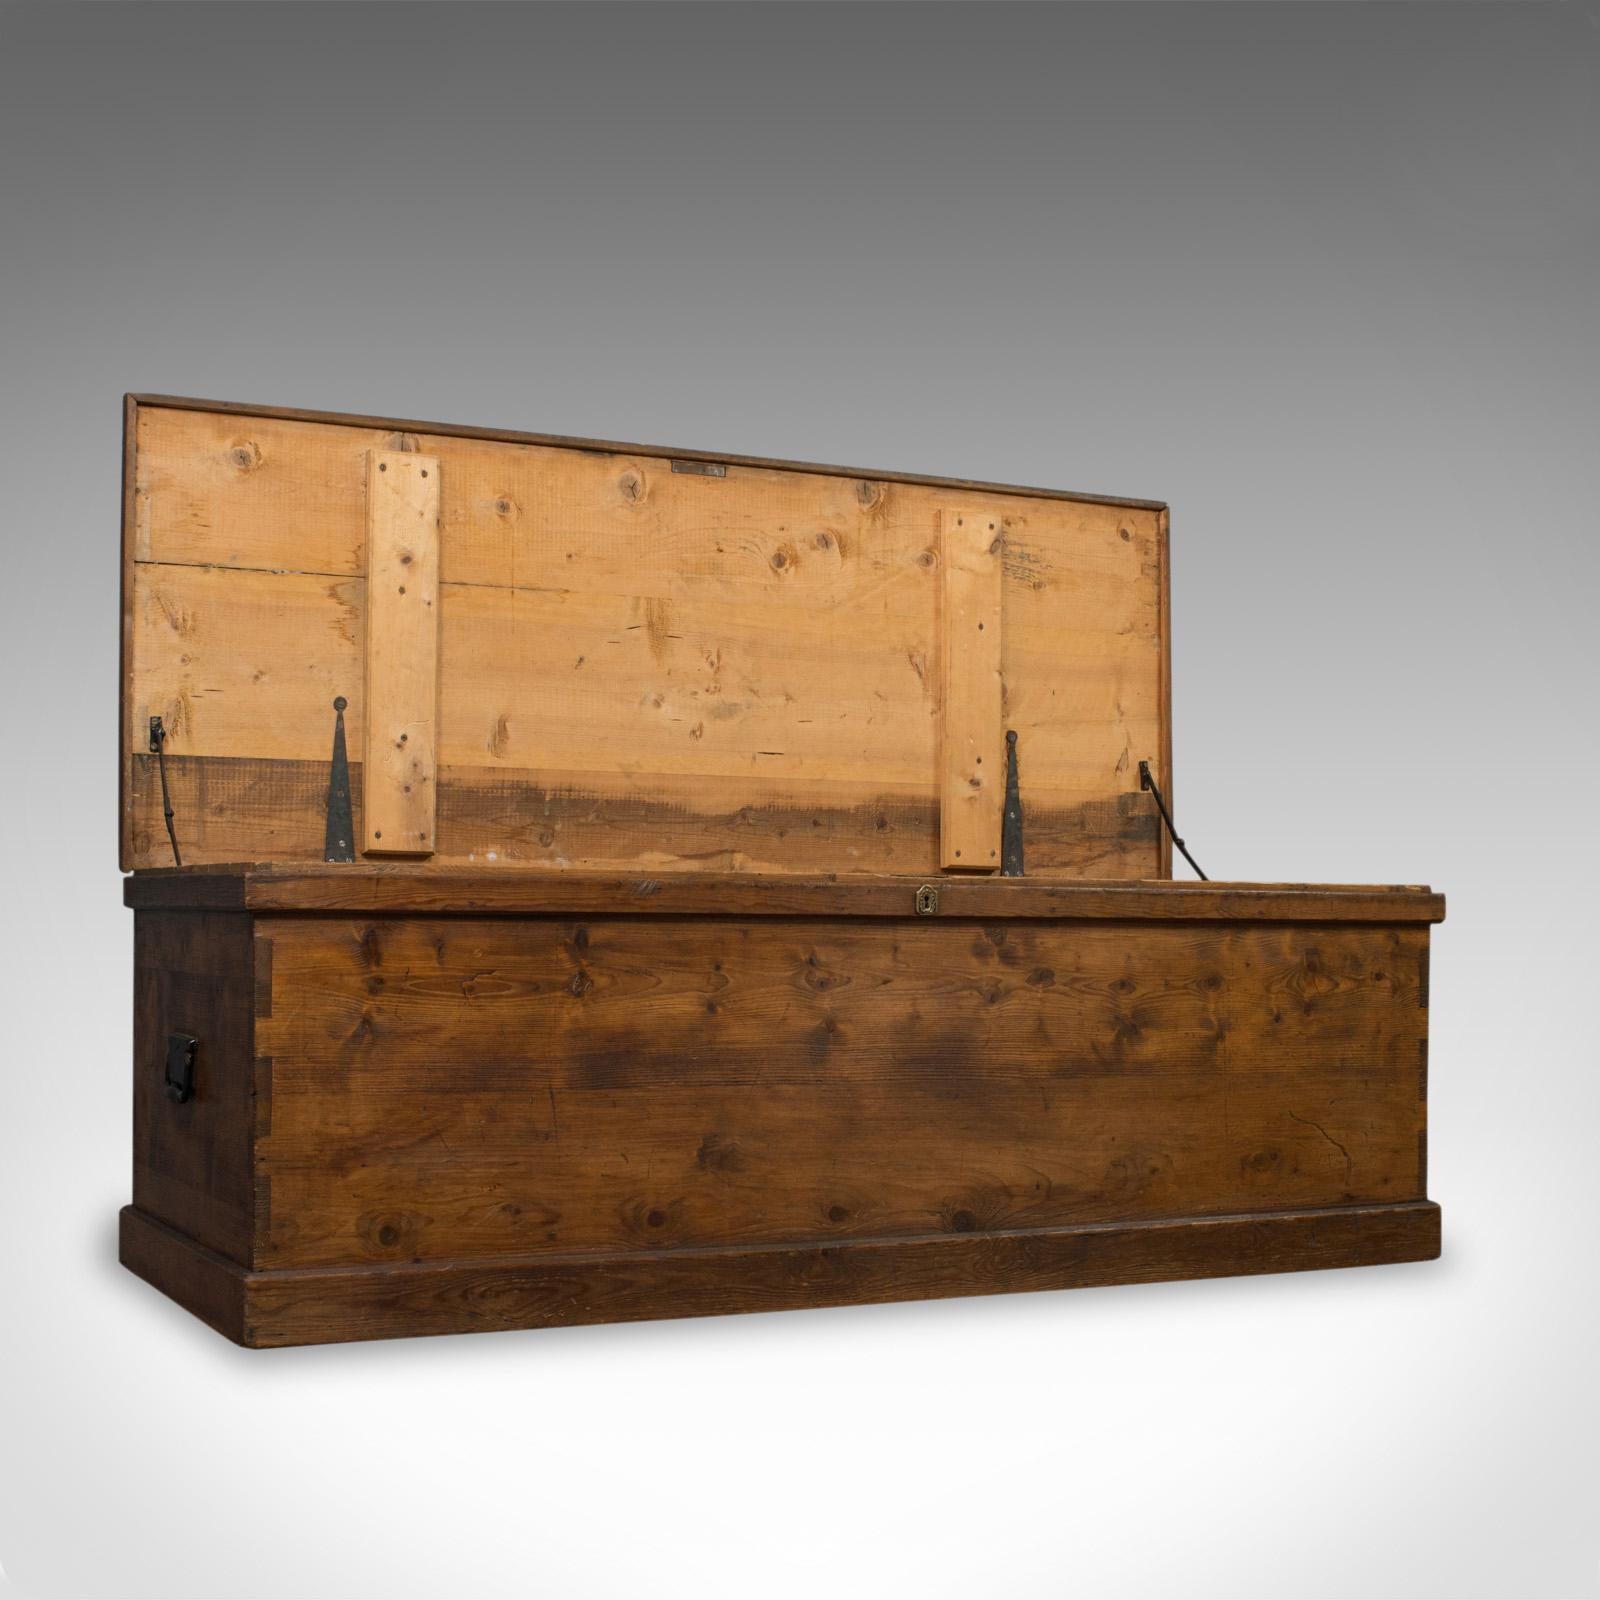 This is a large, antique coffer. An English, pine storage chest or trunk and dating to the Victorian period, circa 1880.

Antique coffer displays a desirable aged patina
Select pine with fine grain interest throughout
Good consistent colour with